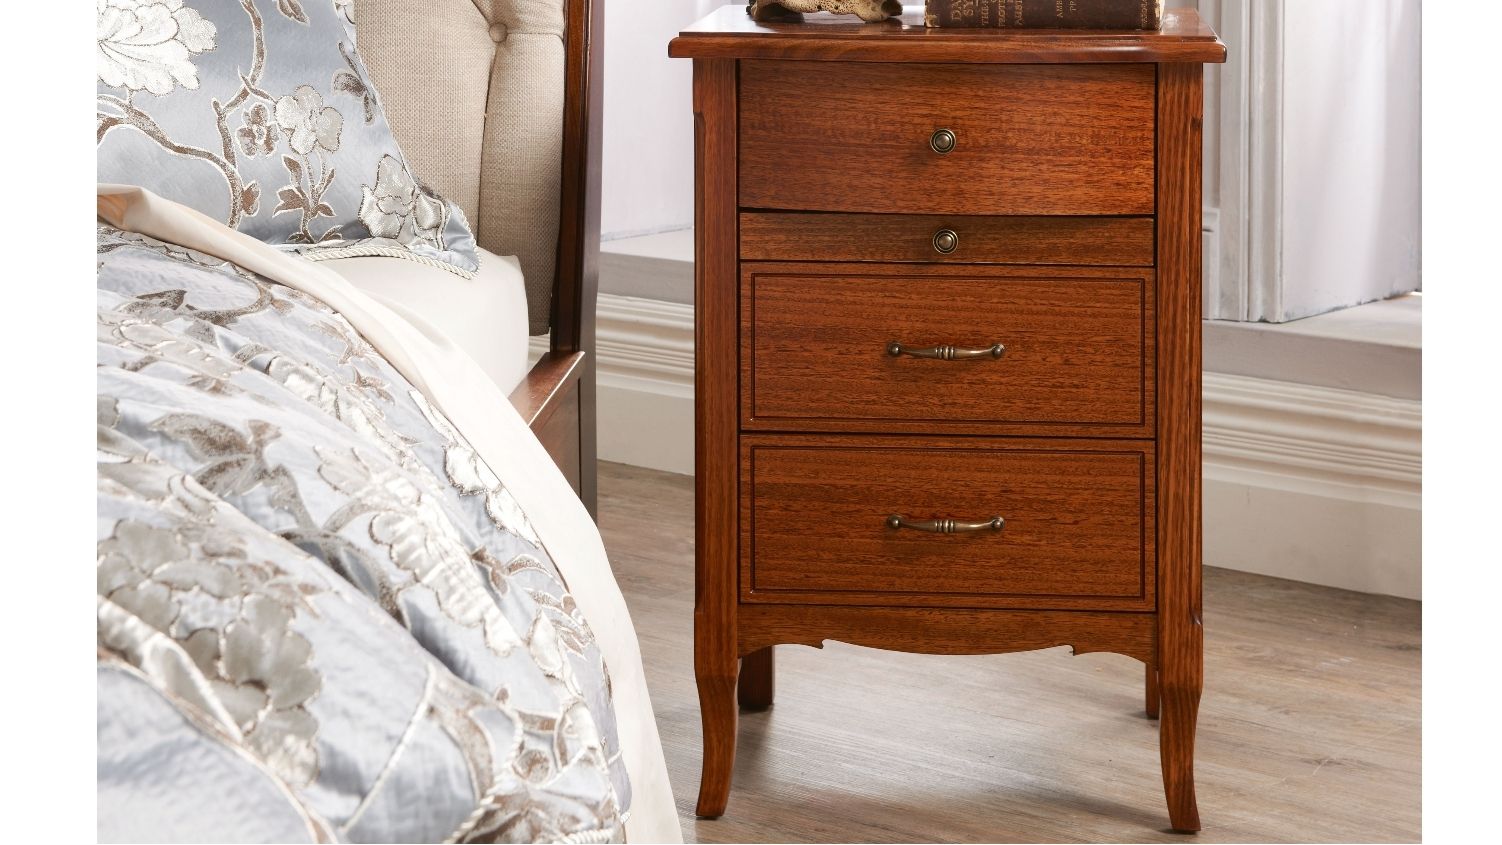 Buy Chelmsford Bedside Table With Breakfast Tray | Harvey Norman Au Regarding Latest Chelmsford 3 Piece Dining Sets (View 15 of 20)